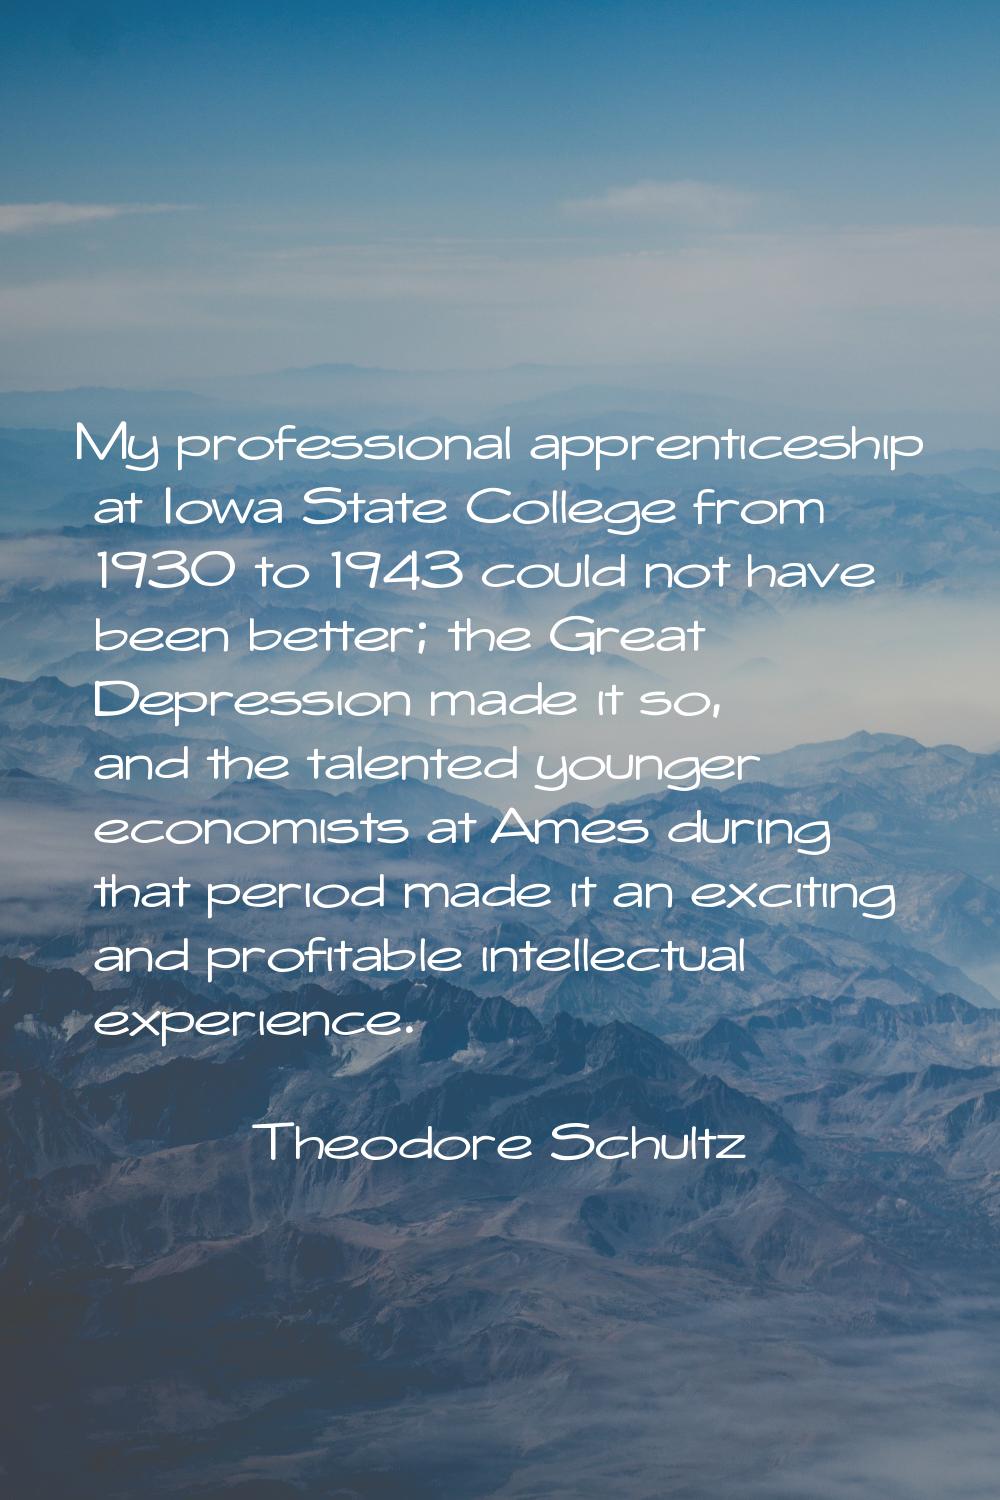 My professional apprenticeship at Iowa State College from 1930 to 1943 could not have been better; 